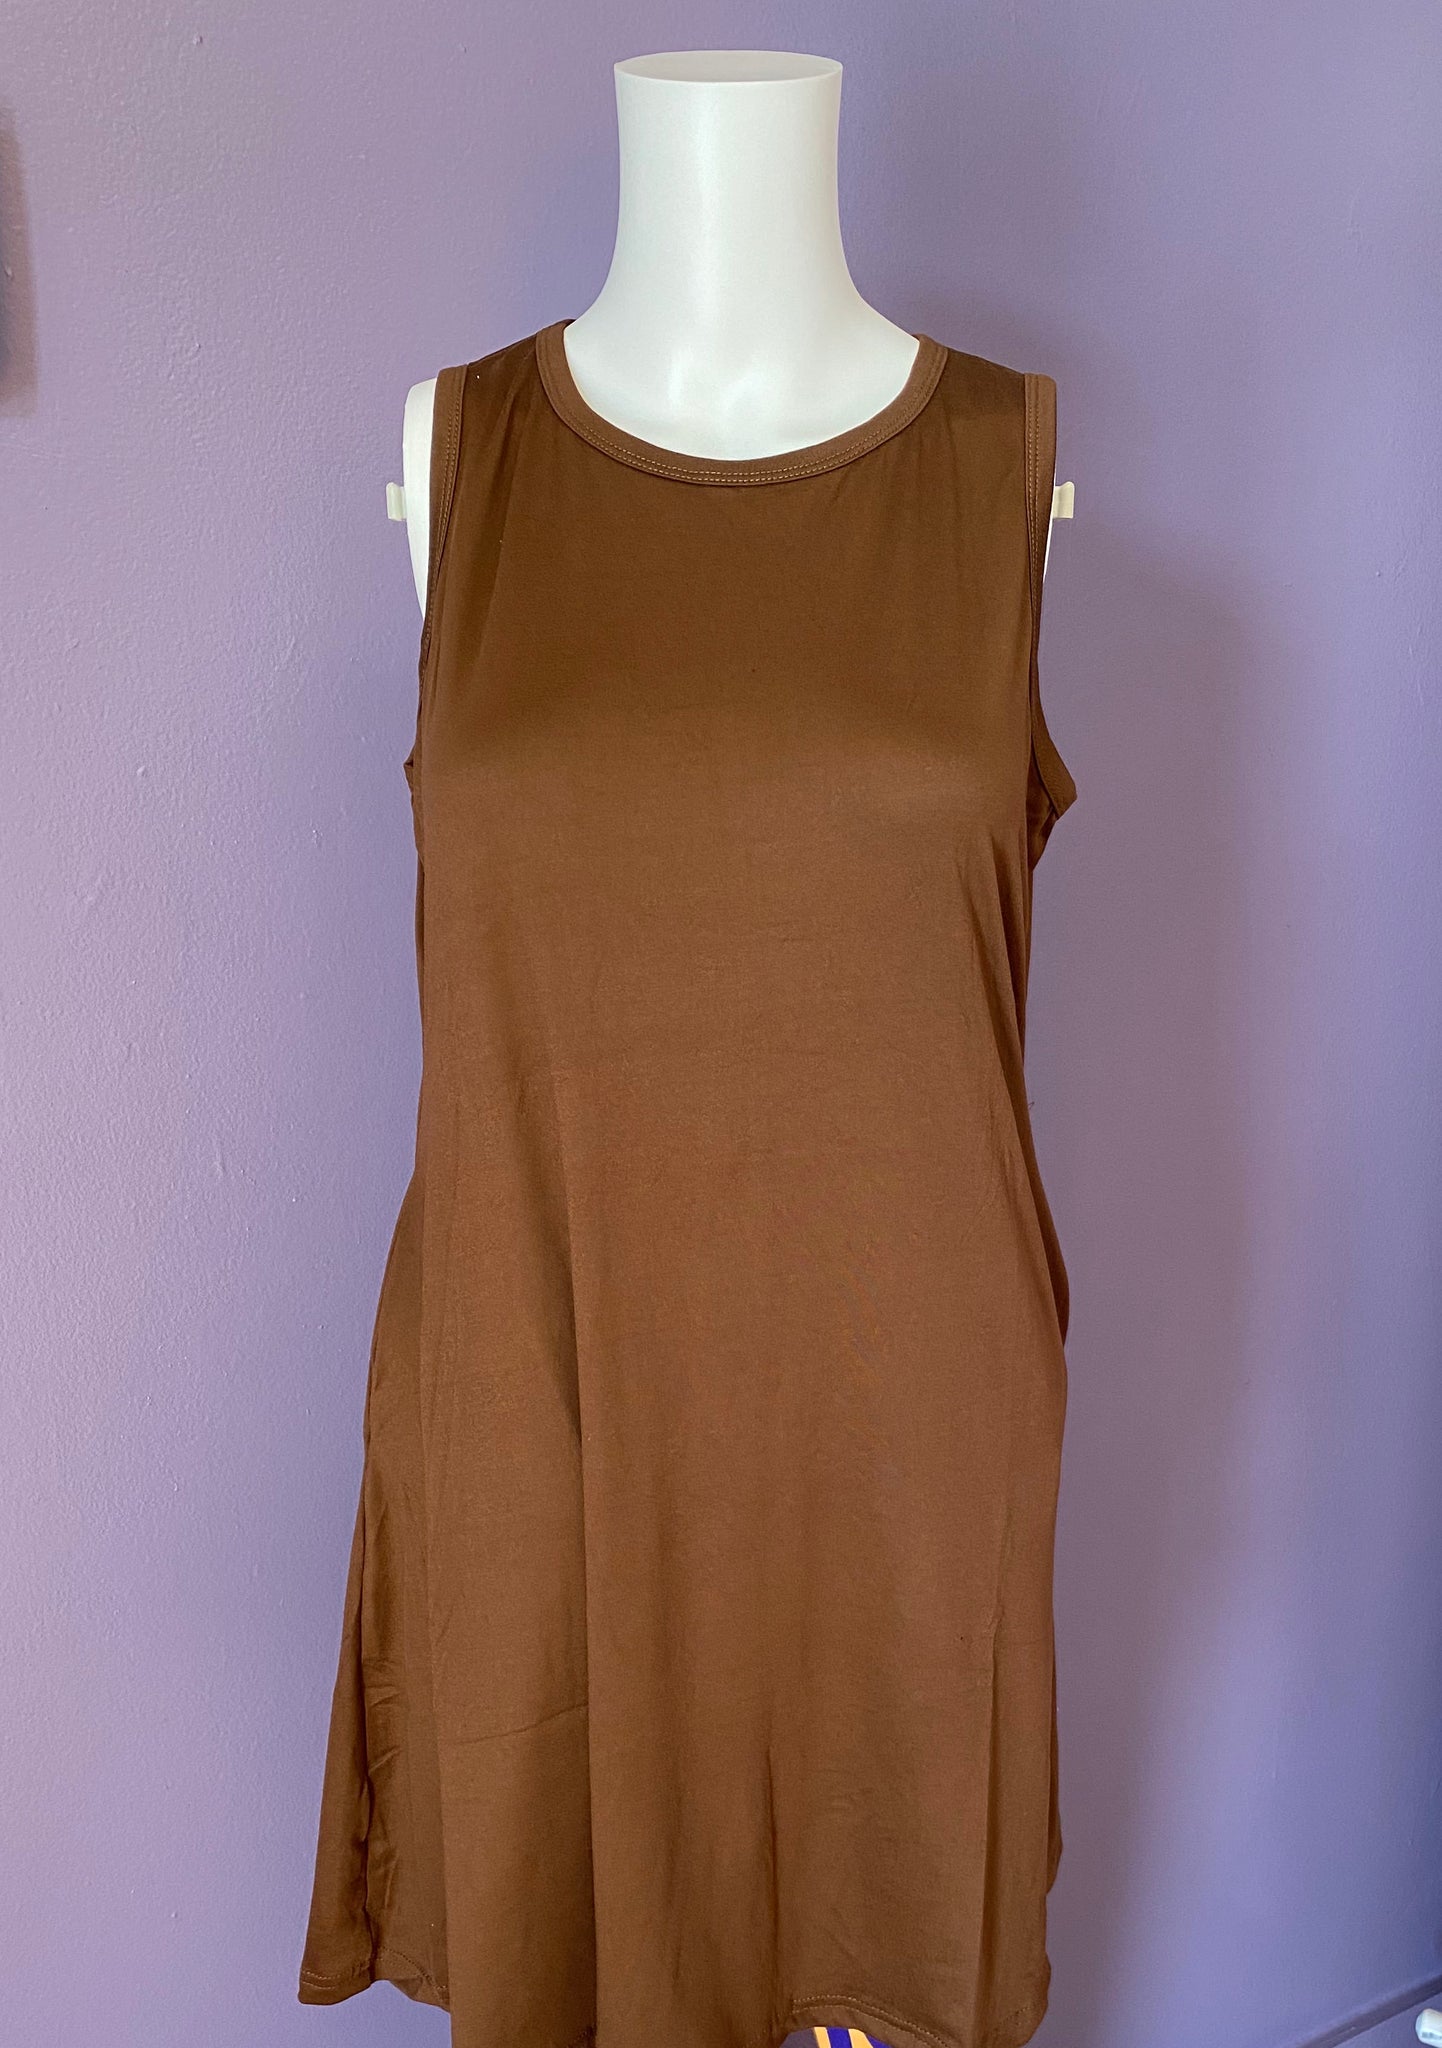 Sleeveless Swing Top With Pockets - Brown